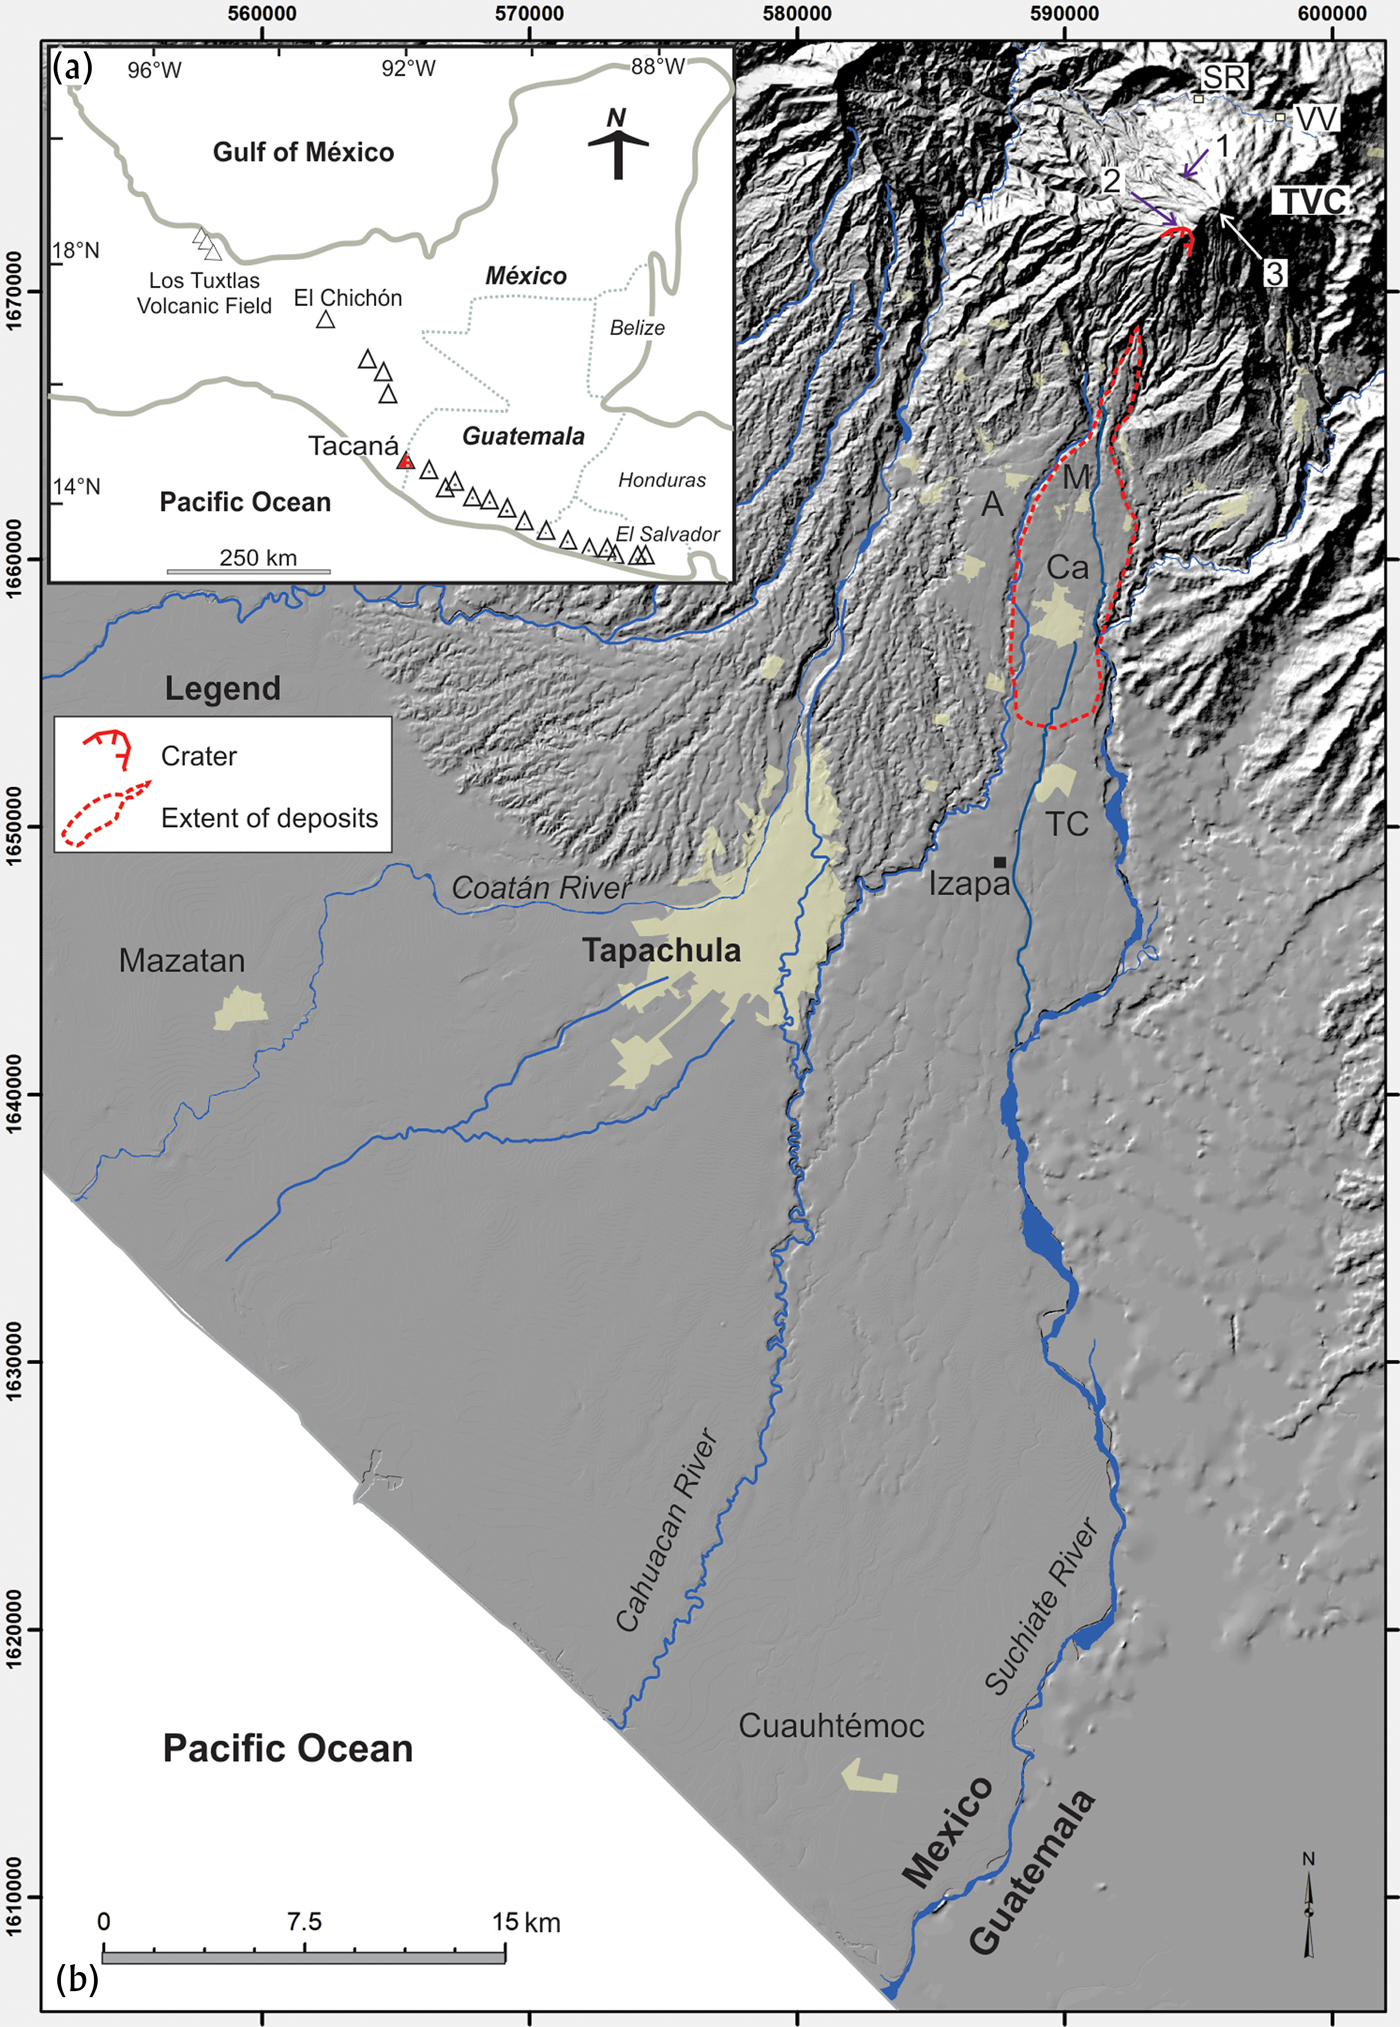 New World Archaeological Foundation map of Izapa (from Lowe et al